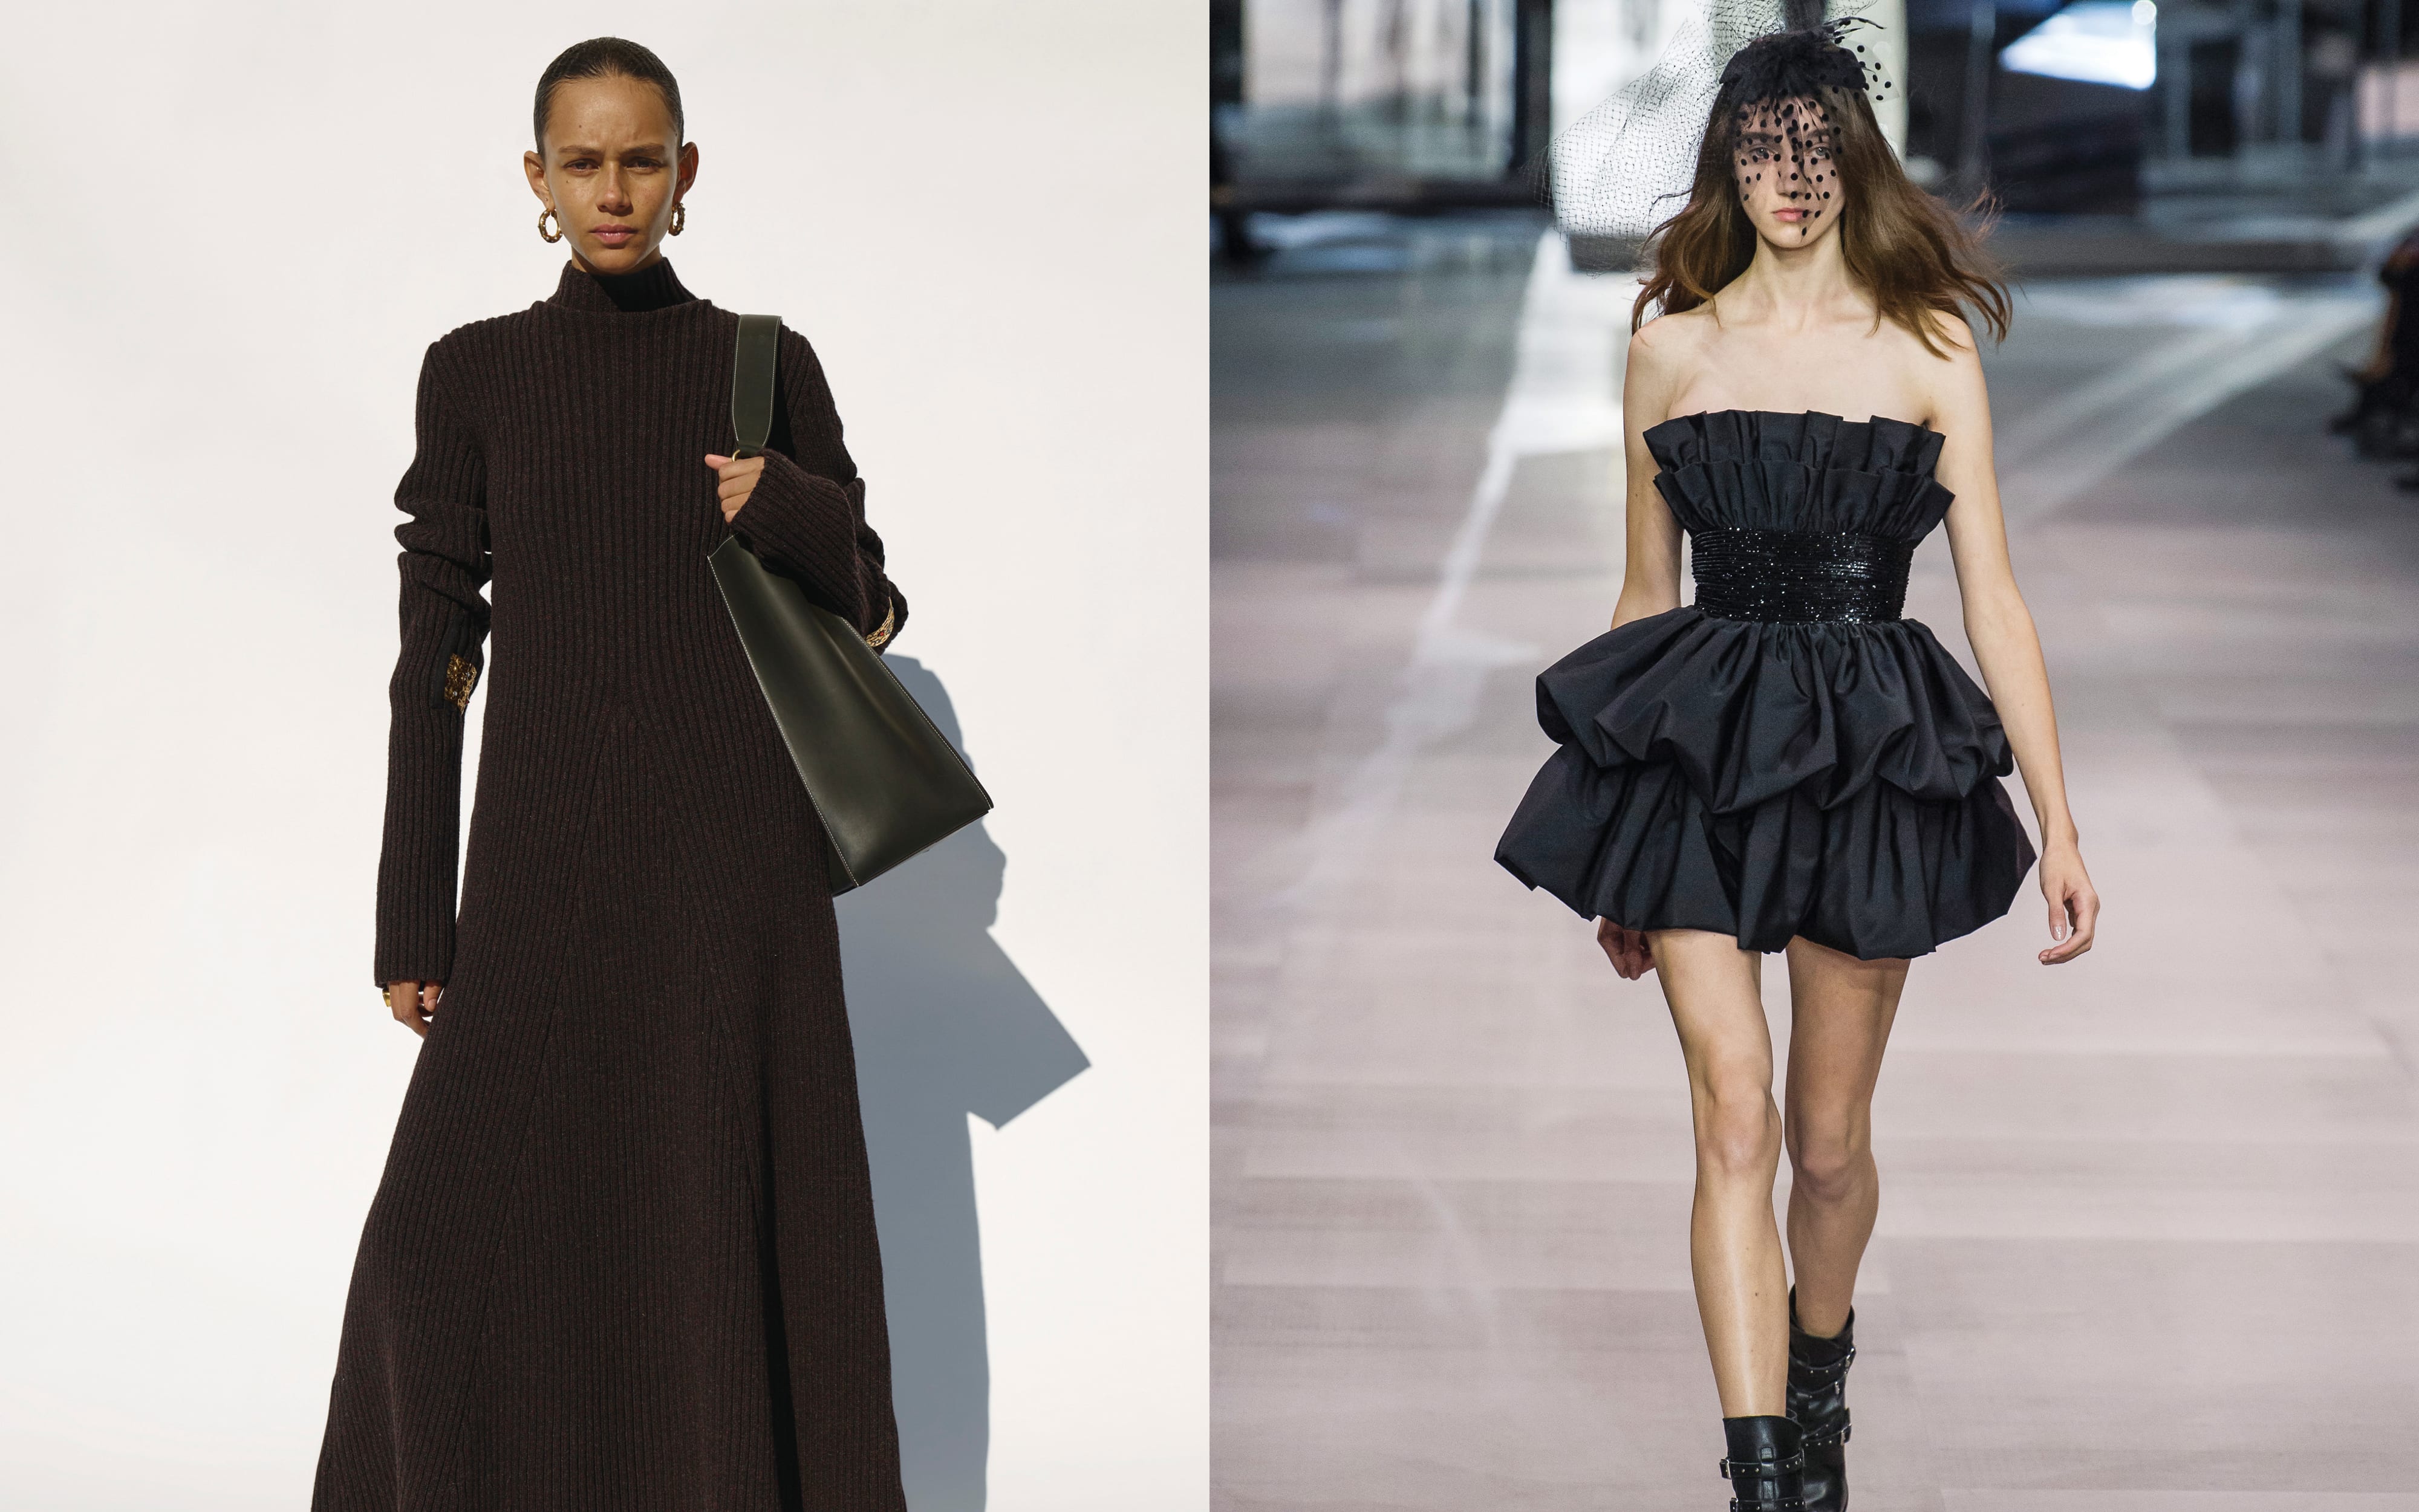 New Celine vs Old Céline: Are Women Better at Designing for Other